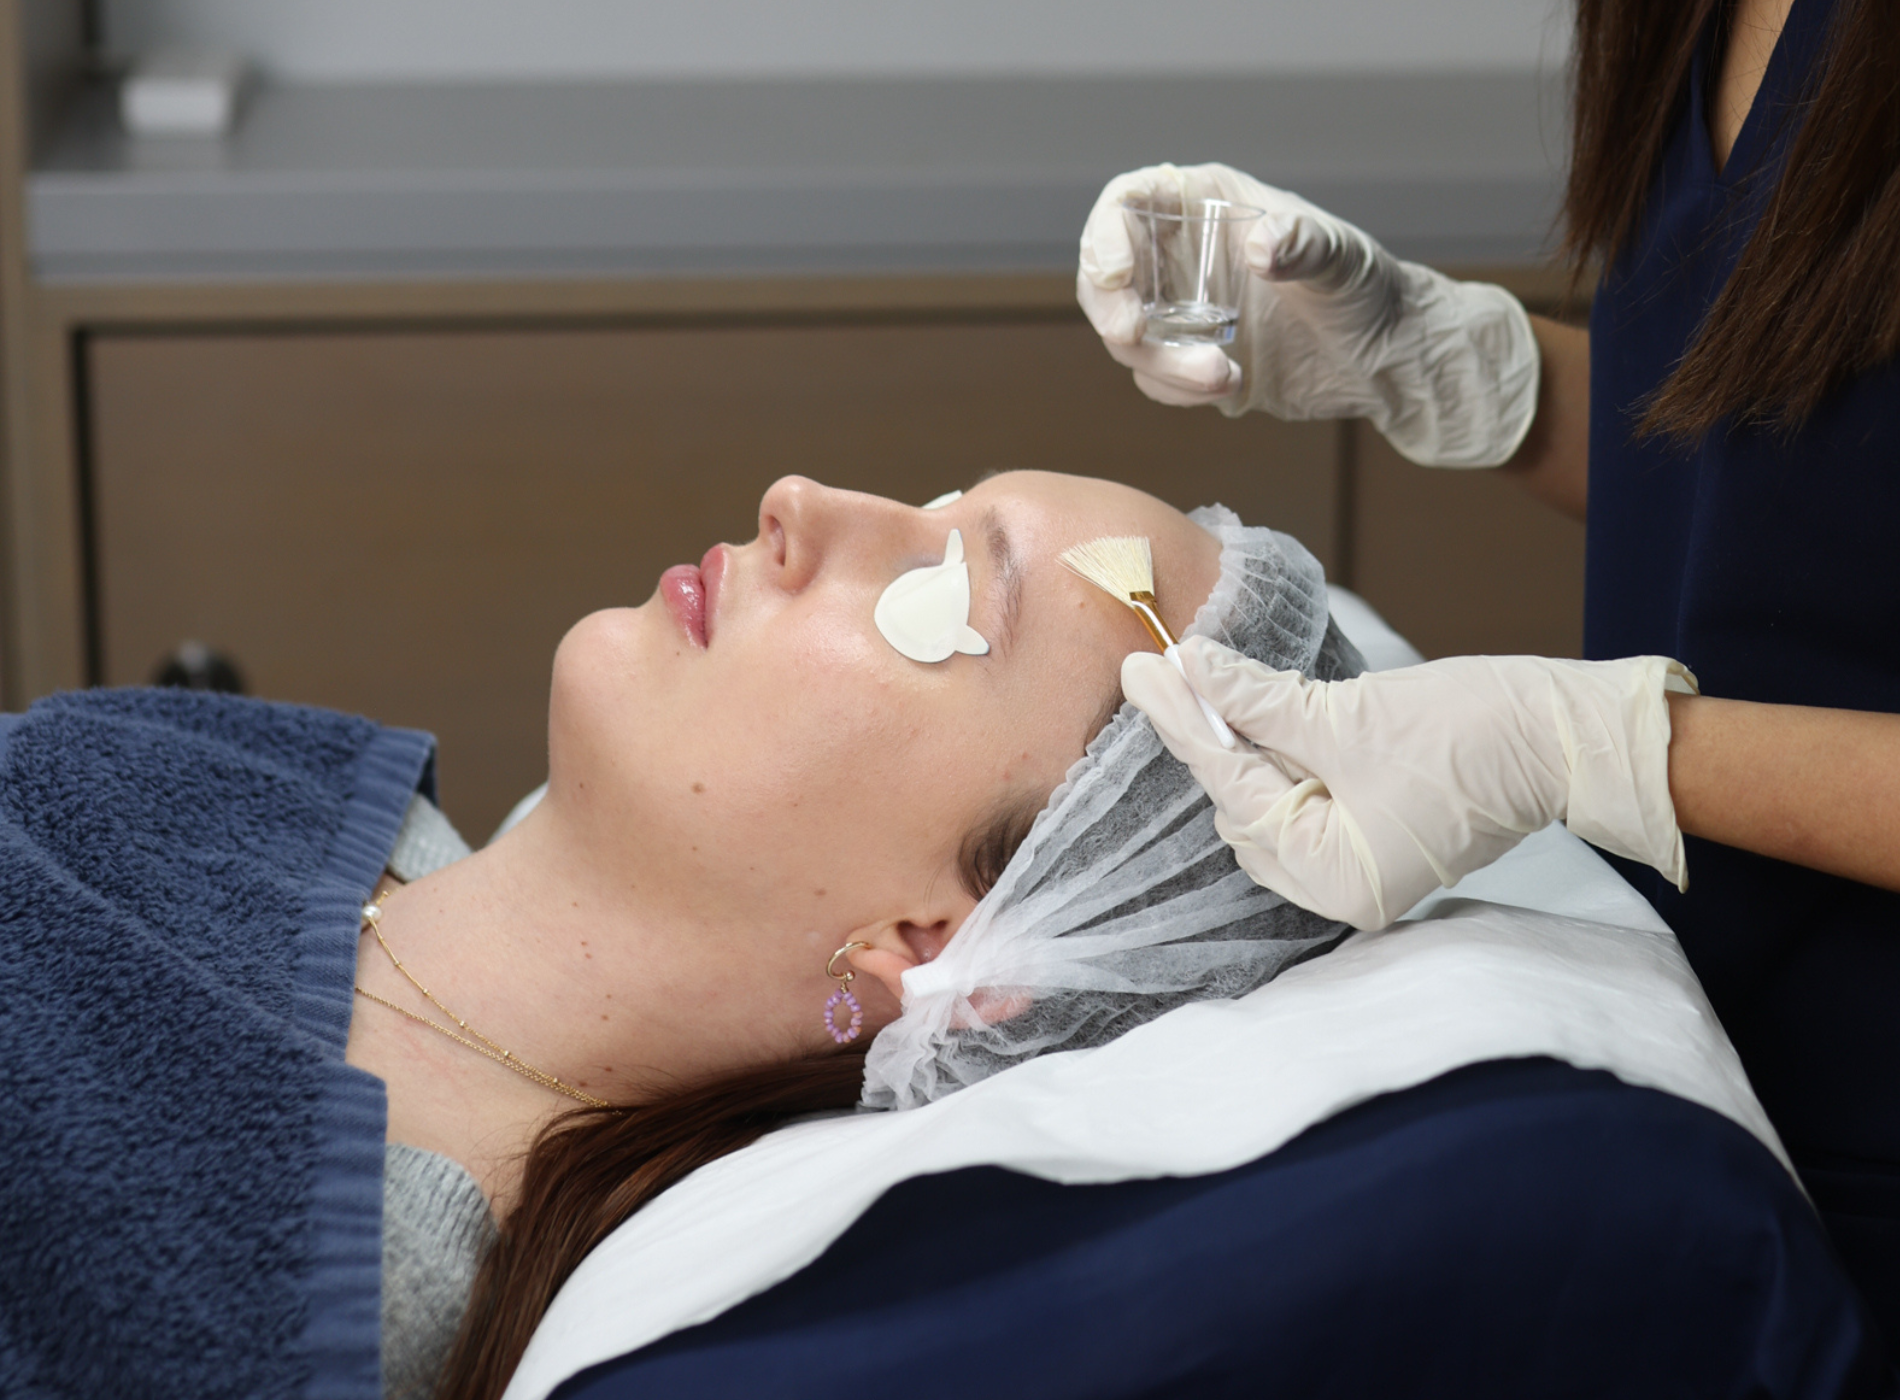 Woman lying on a bed under a blue towel getting a chemical peel treatment